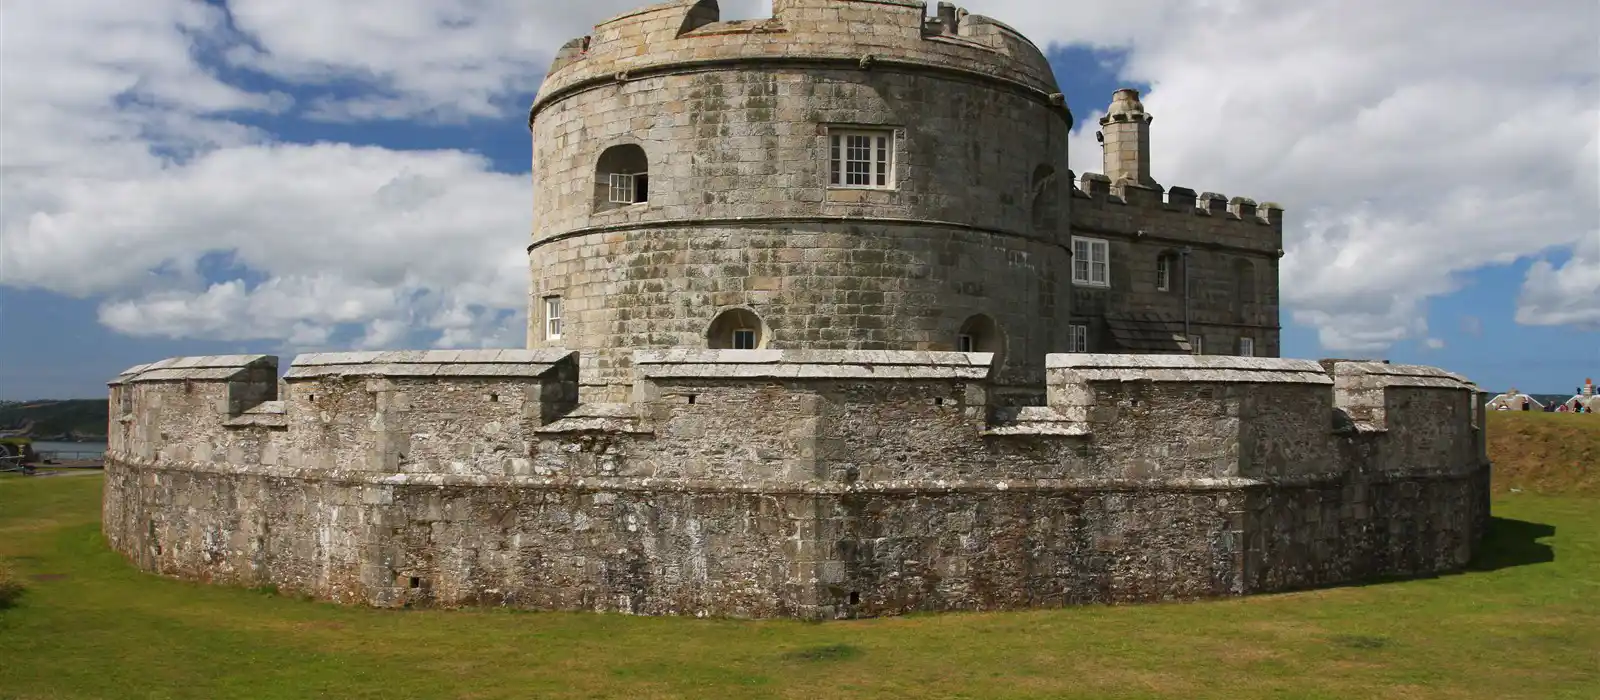 Pendennis Castle in Cornwall